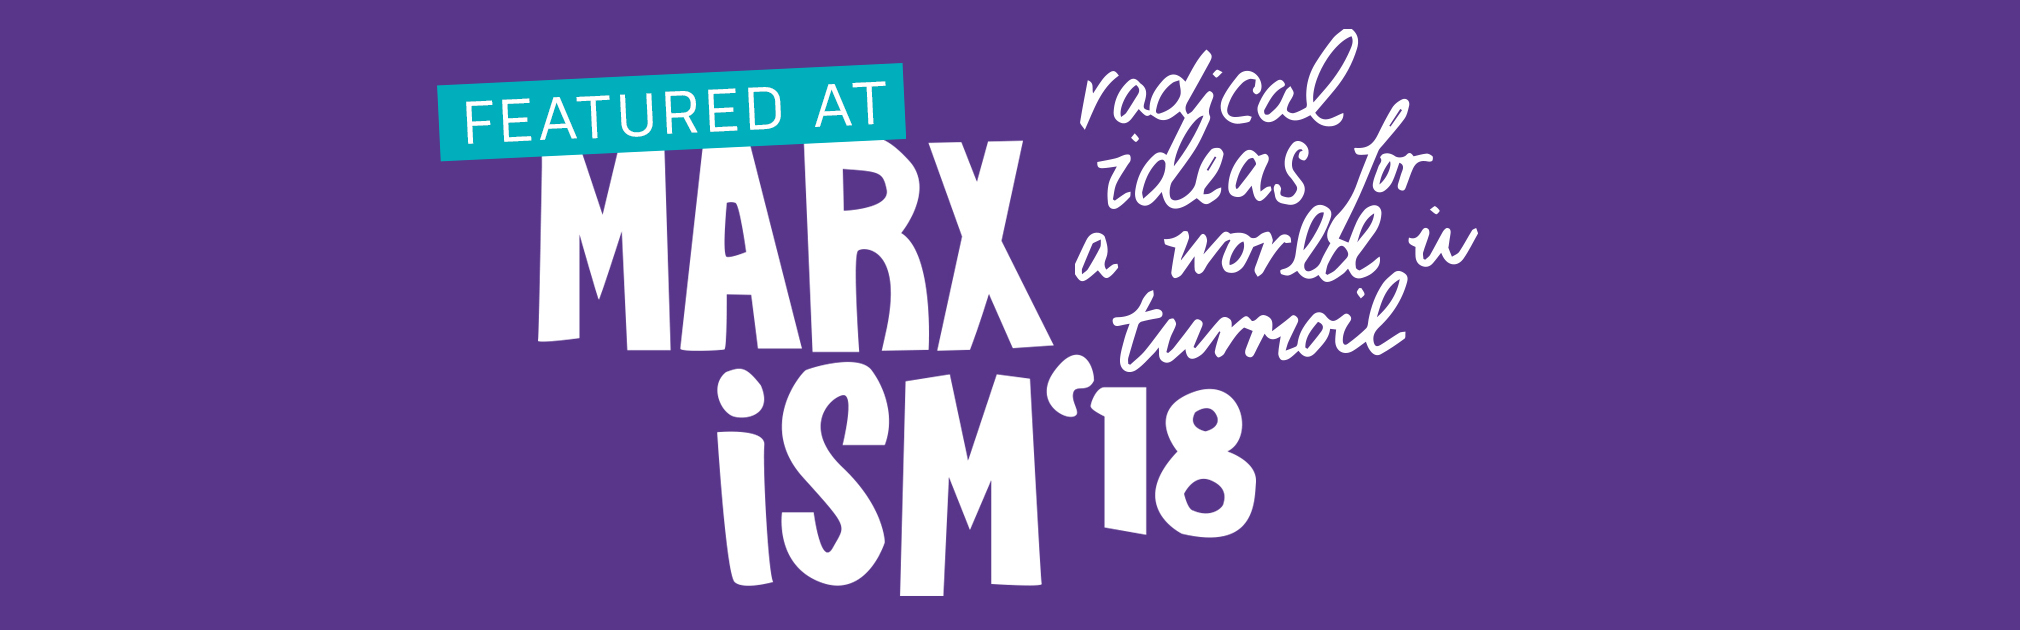 Featured at Marxism 2018